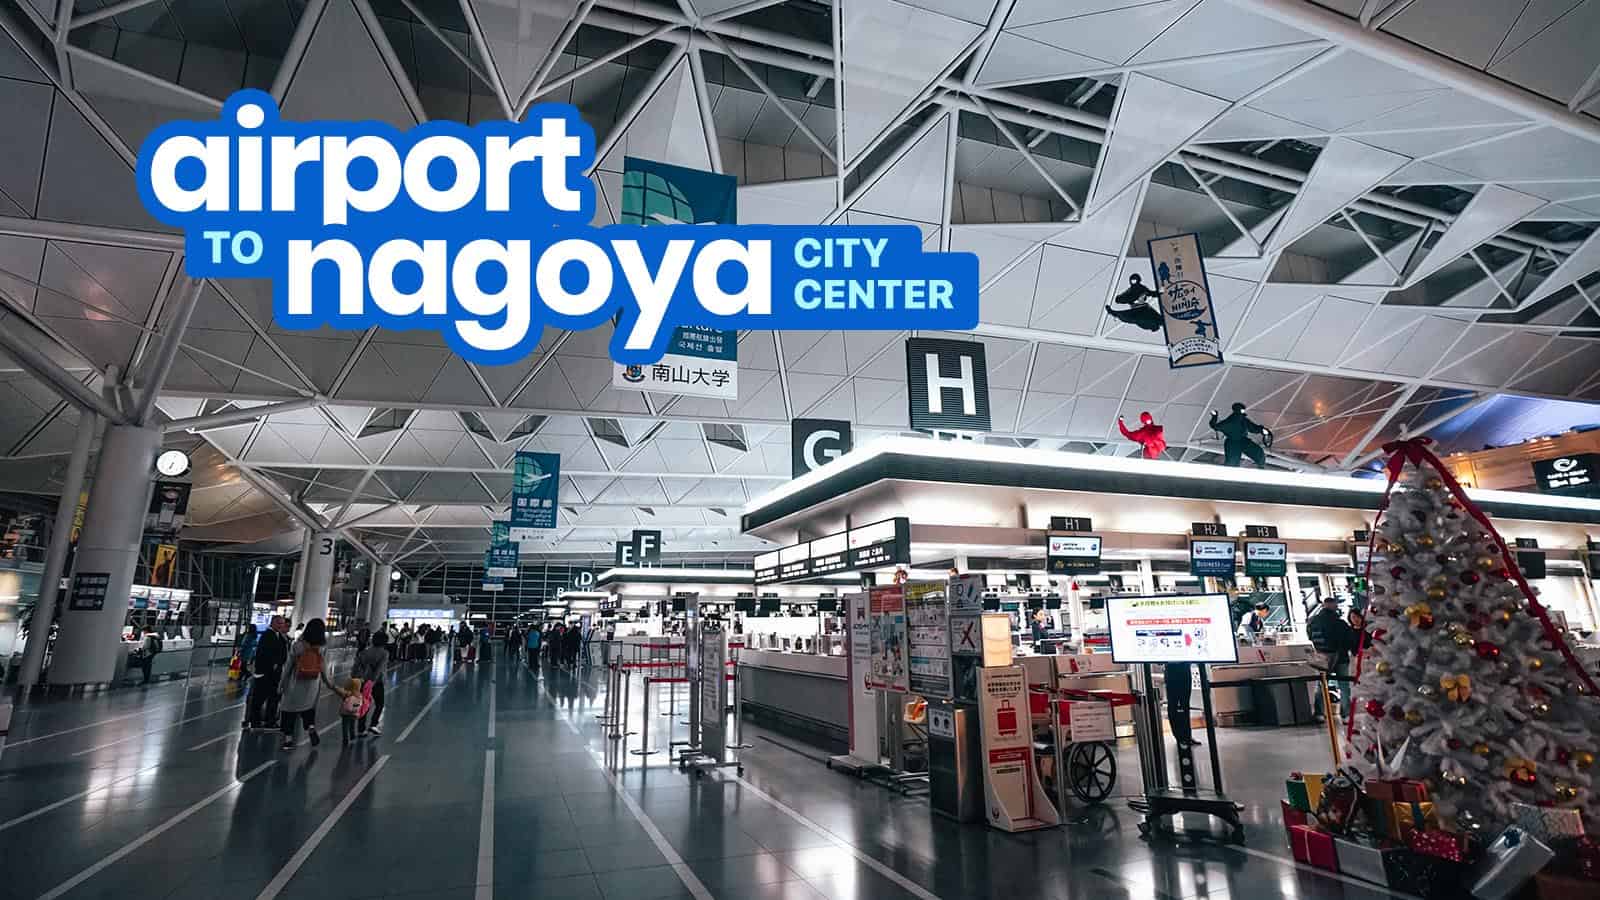 CHUBU CENTRAIR AIRPORT to NAGOYA or GIFU CITY: By Bus and By Train